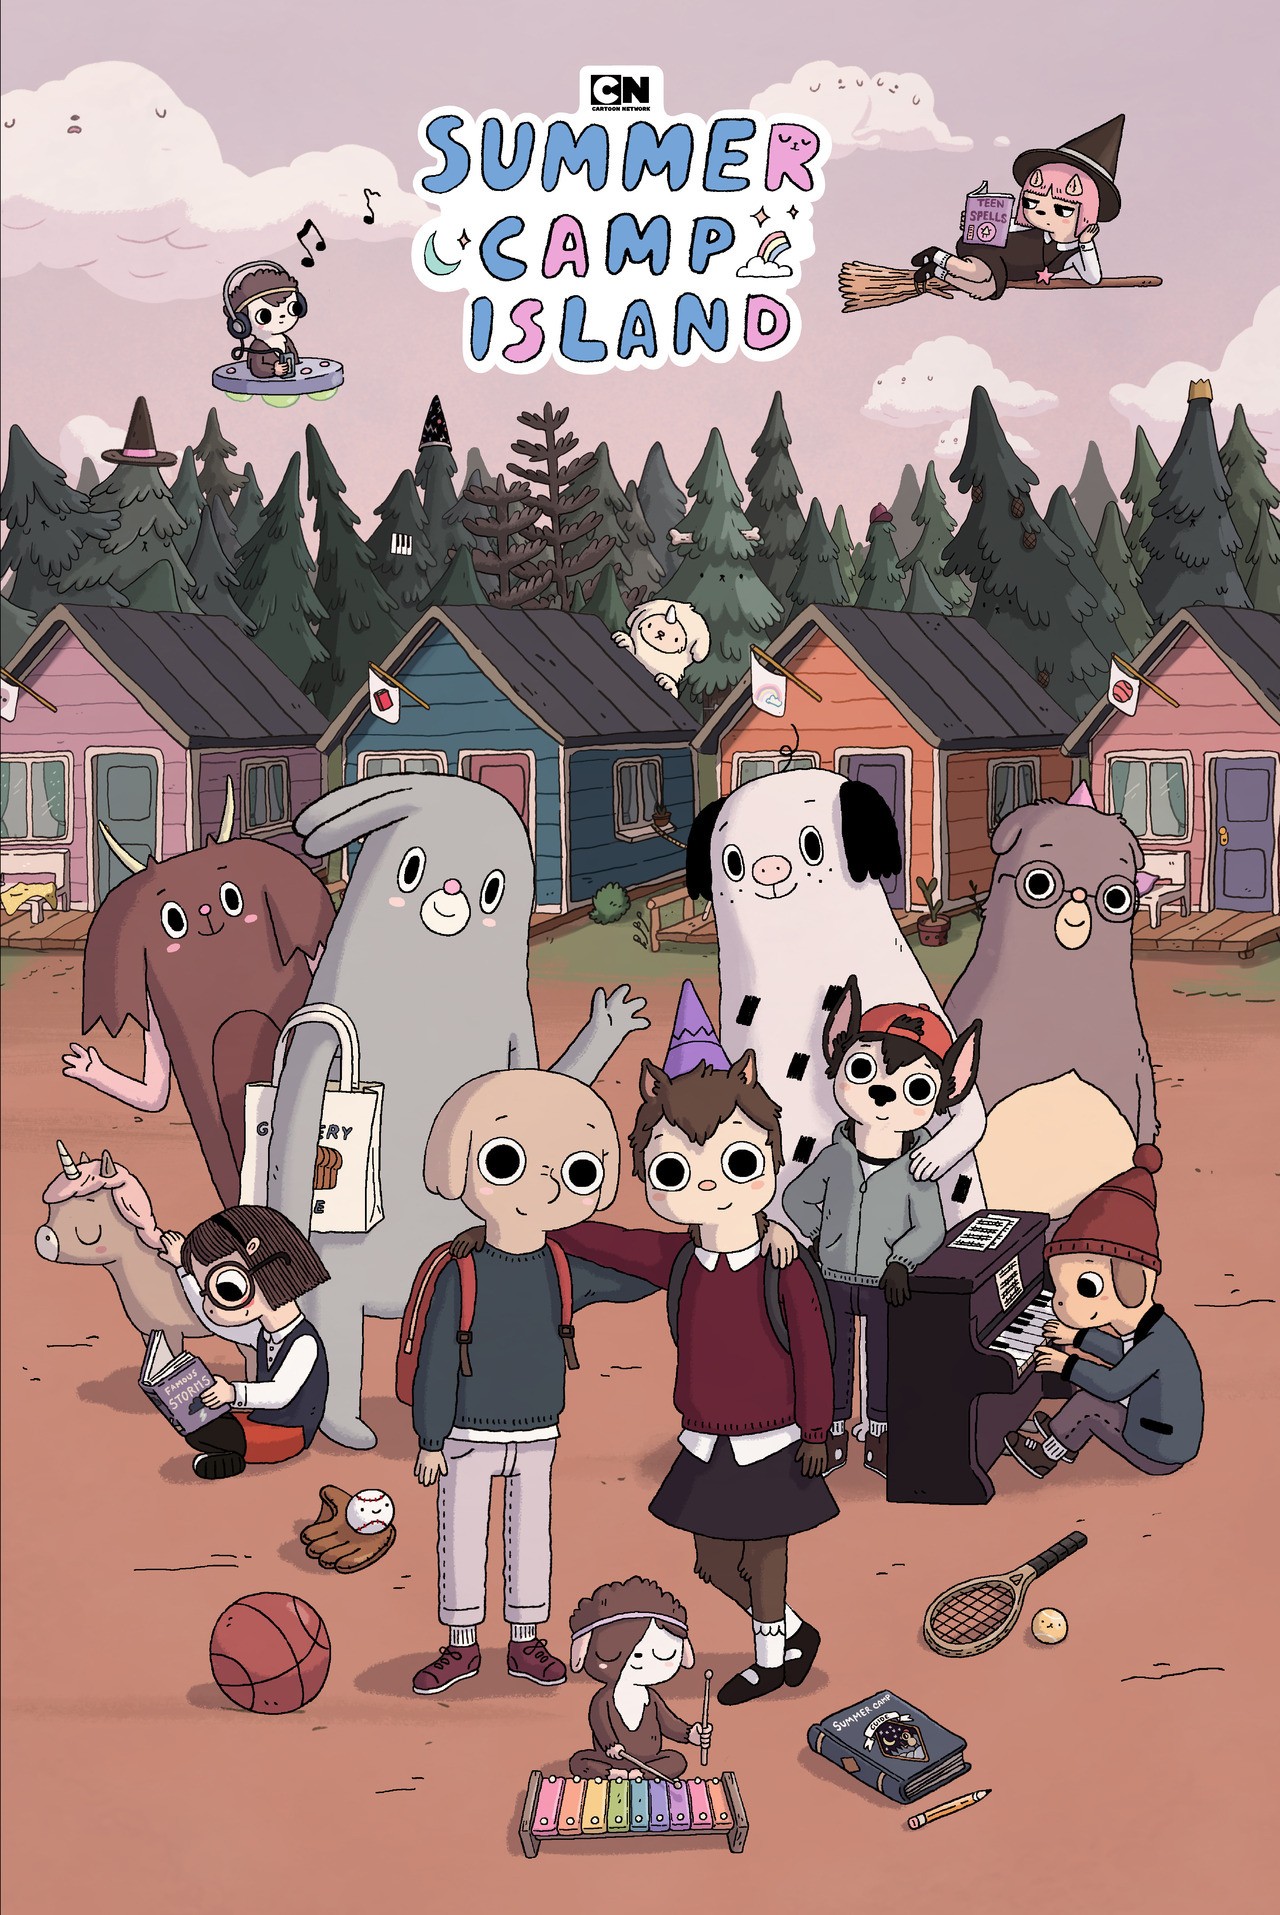 Summer Camp Island - Rotten Tomatoes